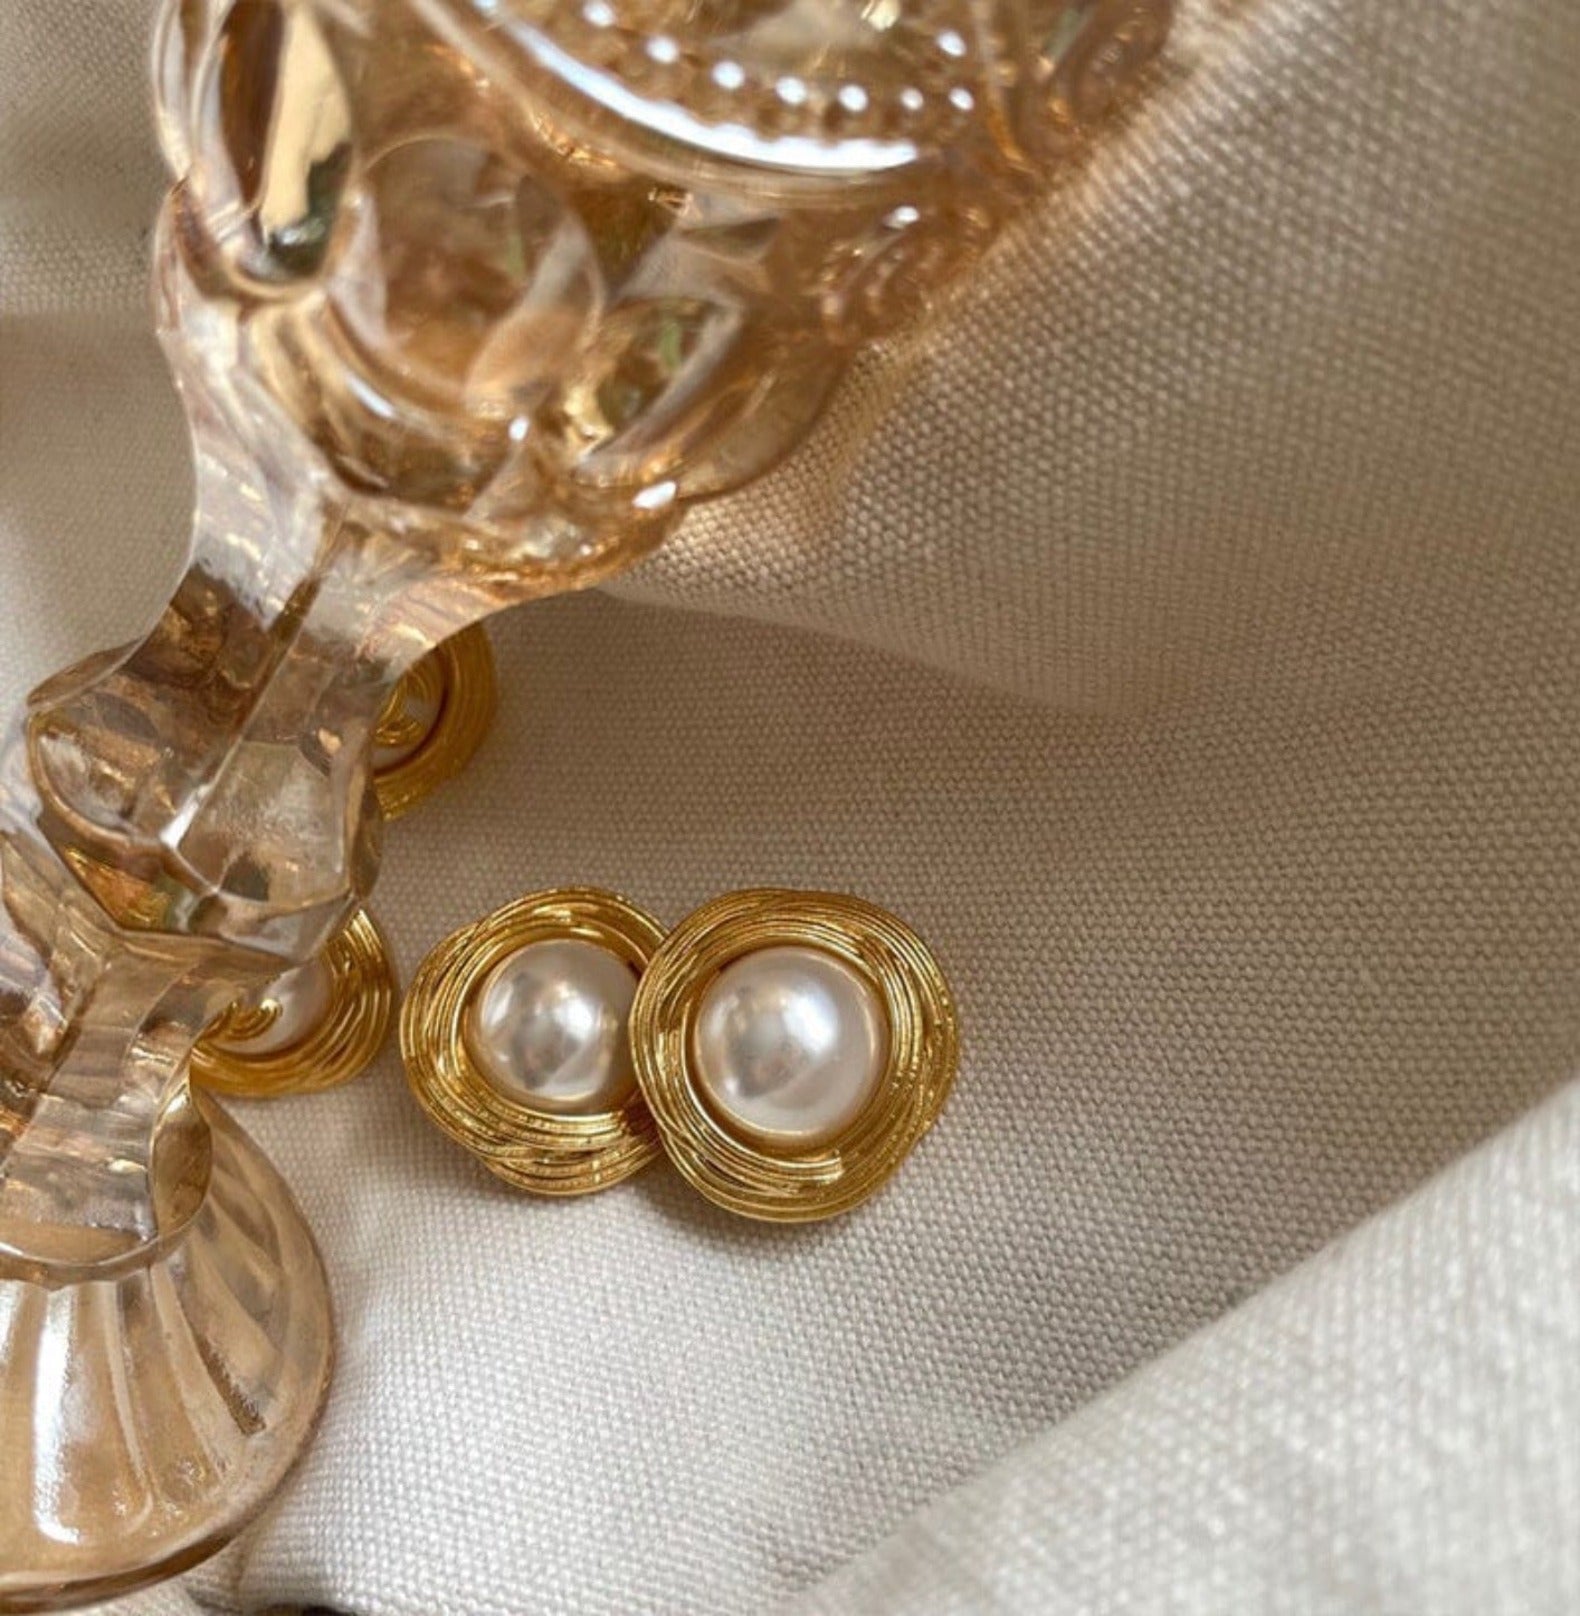 MEDIEVAL PEARL EARRINGS earing Yubama Jewelry Online Store - The Elegant Designs of Gold and Silver ! 